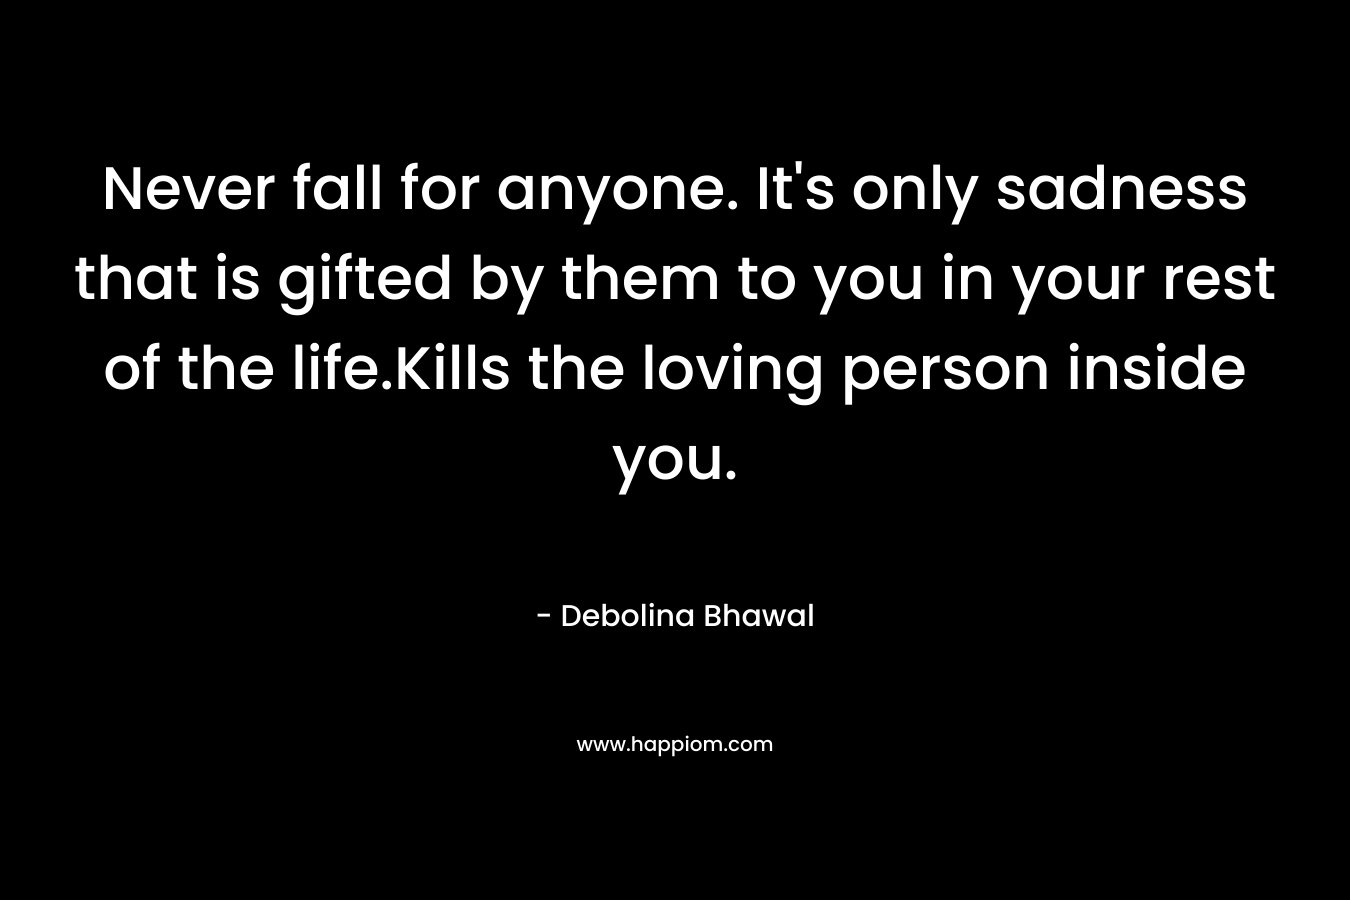 Never fall for anyone. It’s only sadness that is gifted by them to you in your rest of the life.Kills the loving person inside you. – Debolina Bhawal